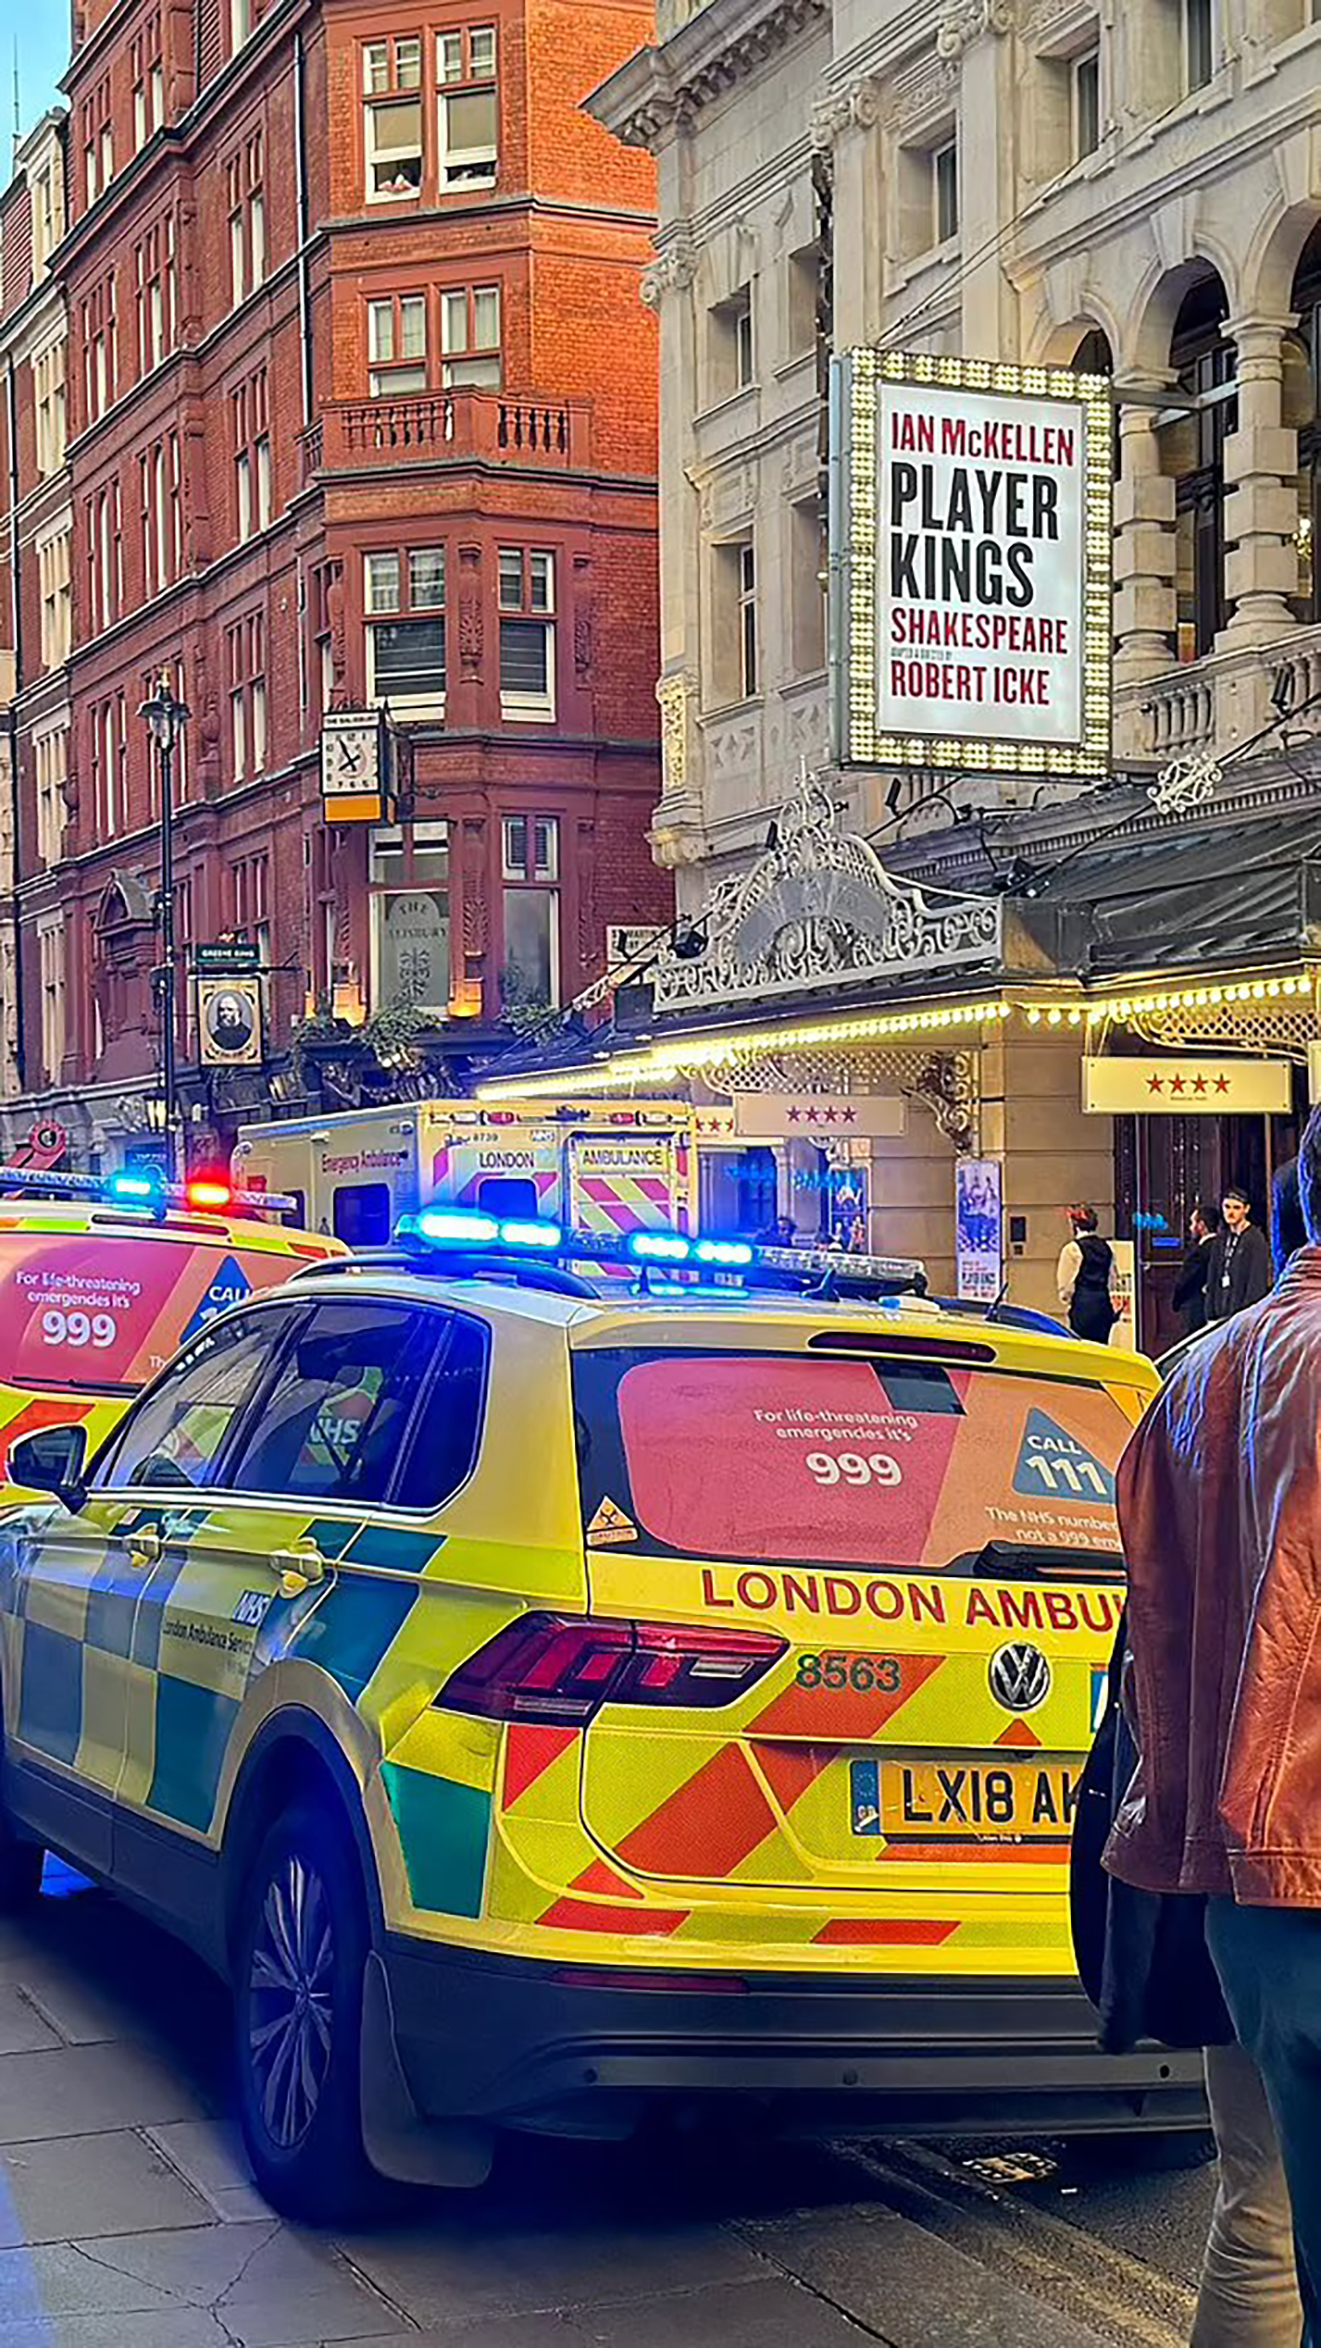 Ambulance vehicles outside the Noel Coward theatre in London after the incident on Monday